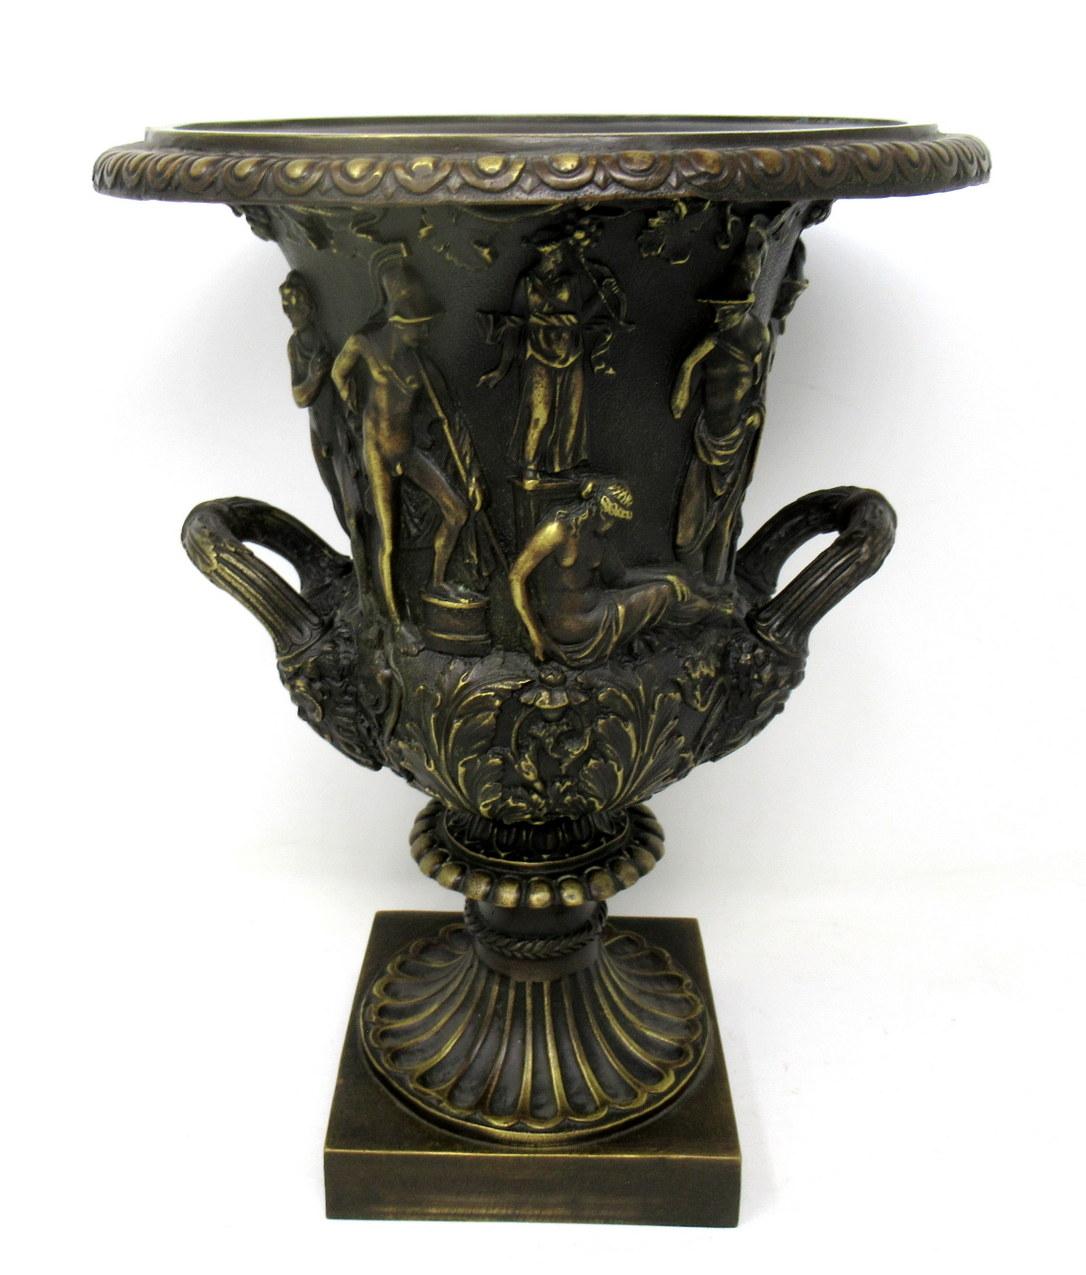 Regency Antique Pair of Grand Tour Style Borghese or Medici Bronze Campana Urns Vases